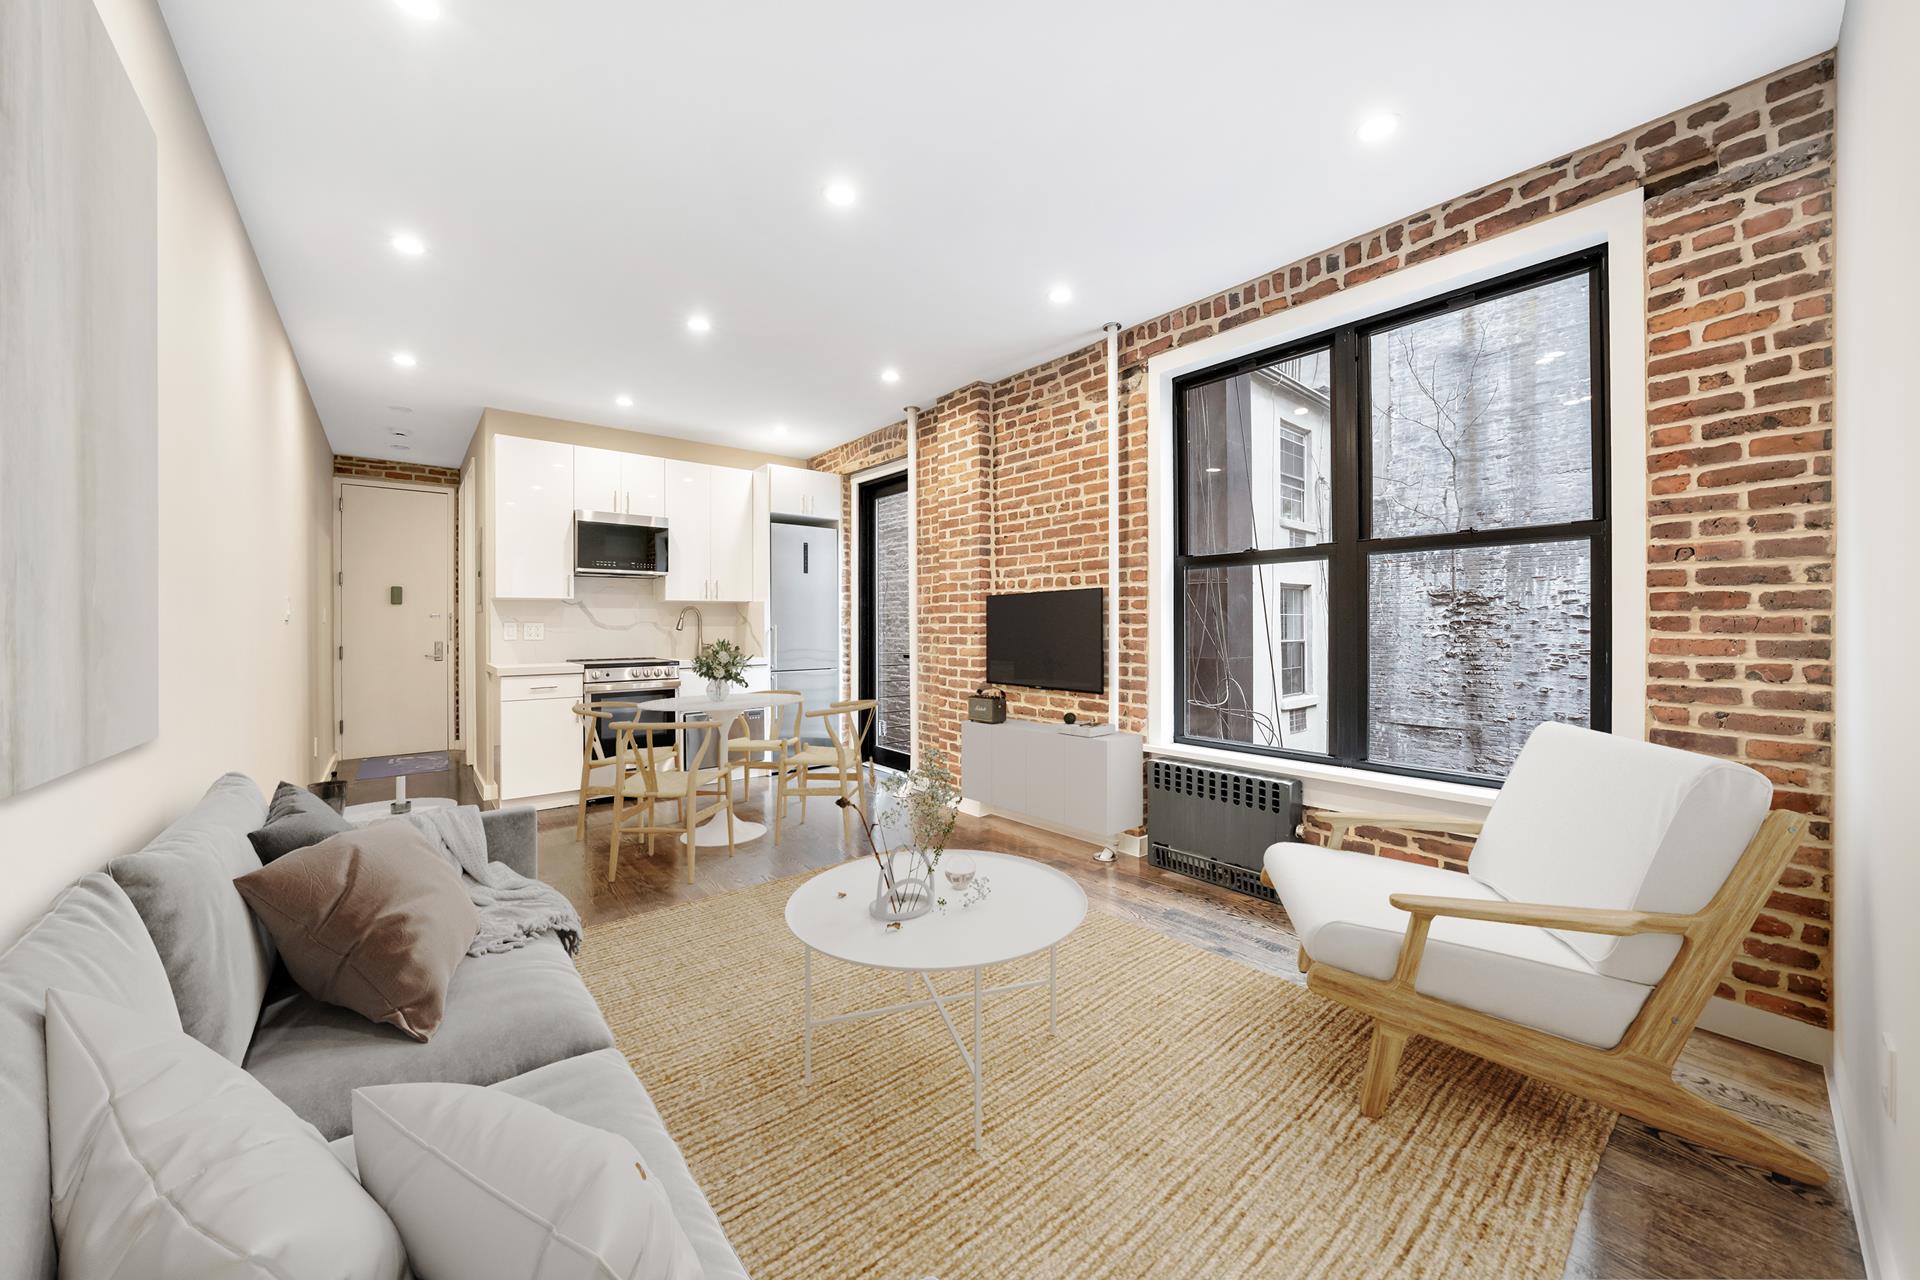 228 8th Avenue 4, Chelsea, Downtown, NYC - 3 Bedrooms  
1 Bathrooms  
5 Rooms - 